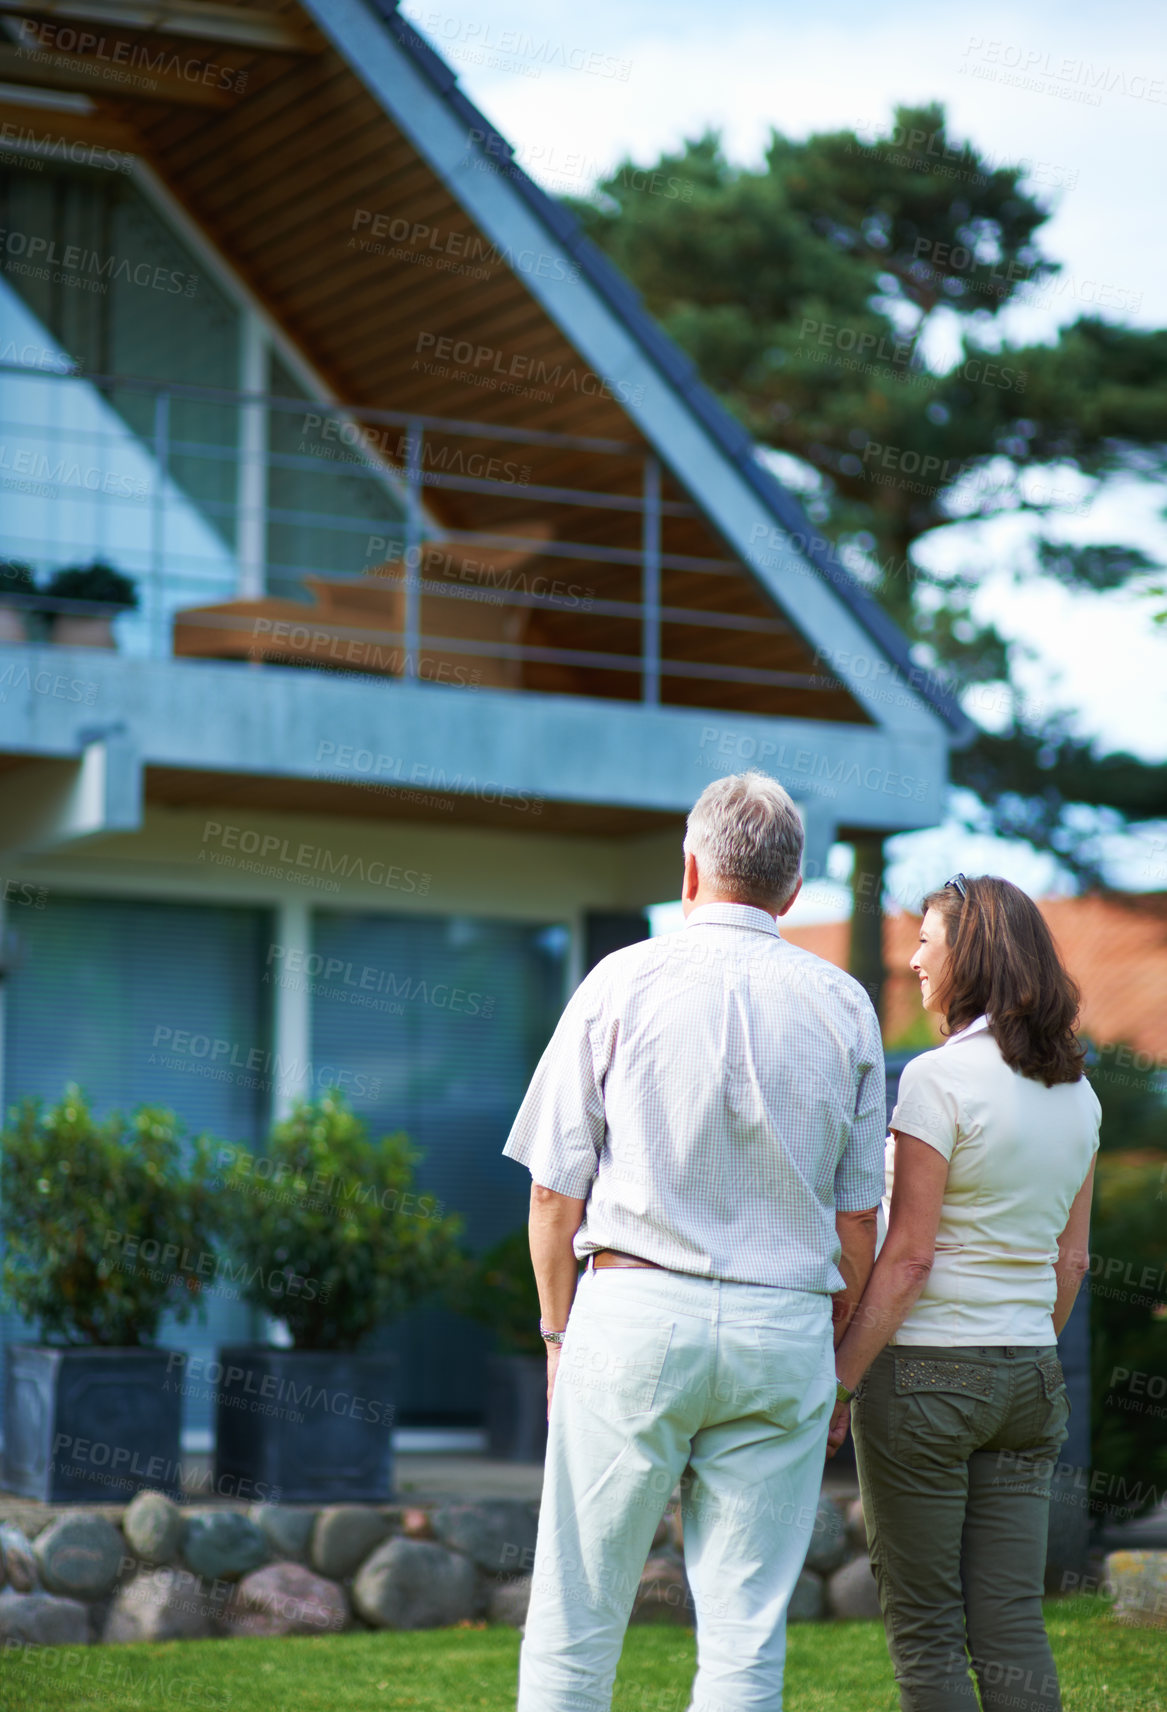 Buy stock photo Rearview shot of a mature couple standing hand-in-hand in front of their home